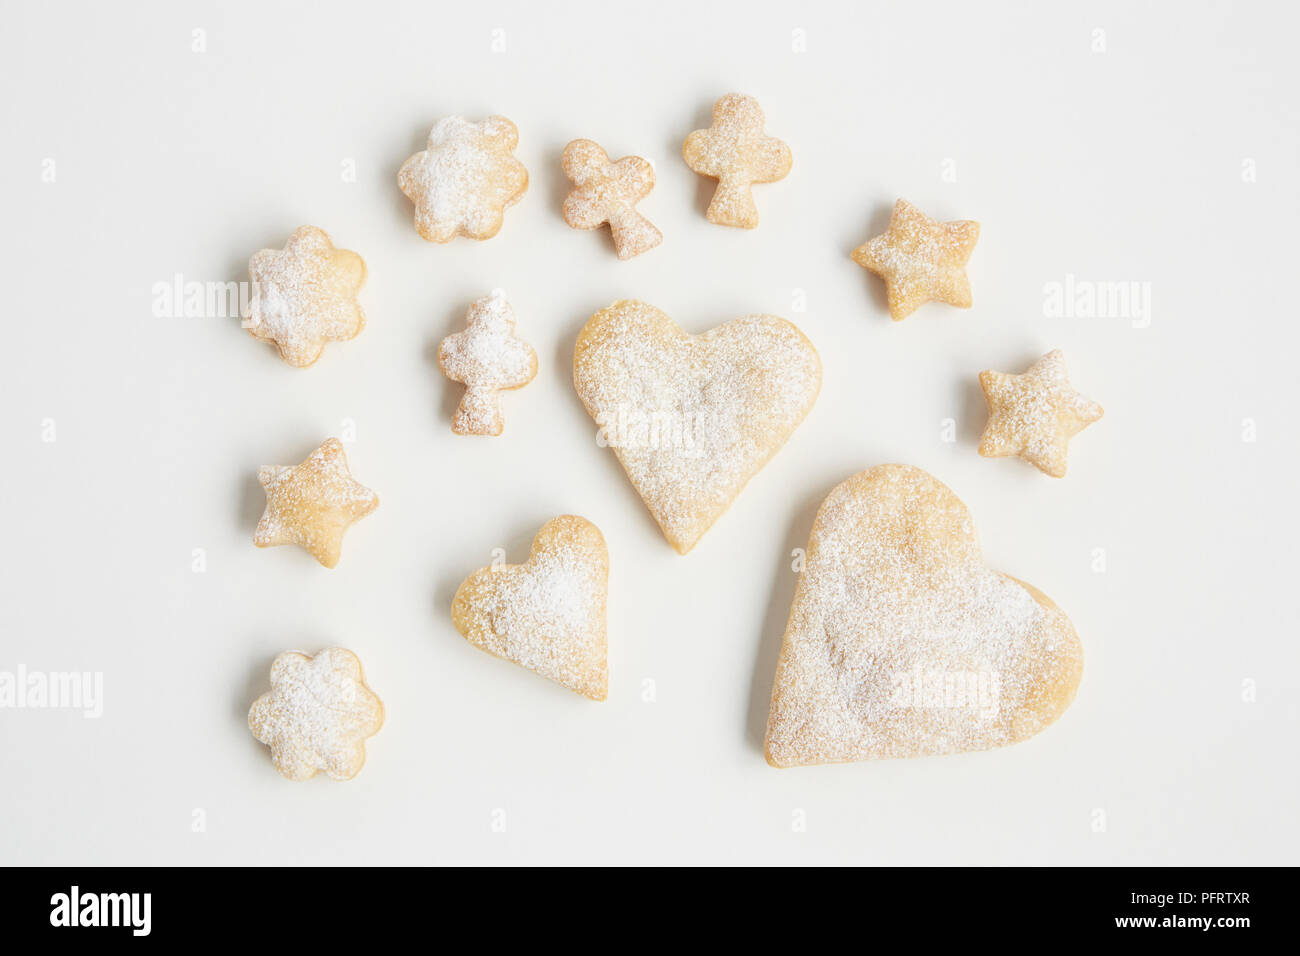 Heart, star and flower biscuits Stock Photo